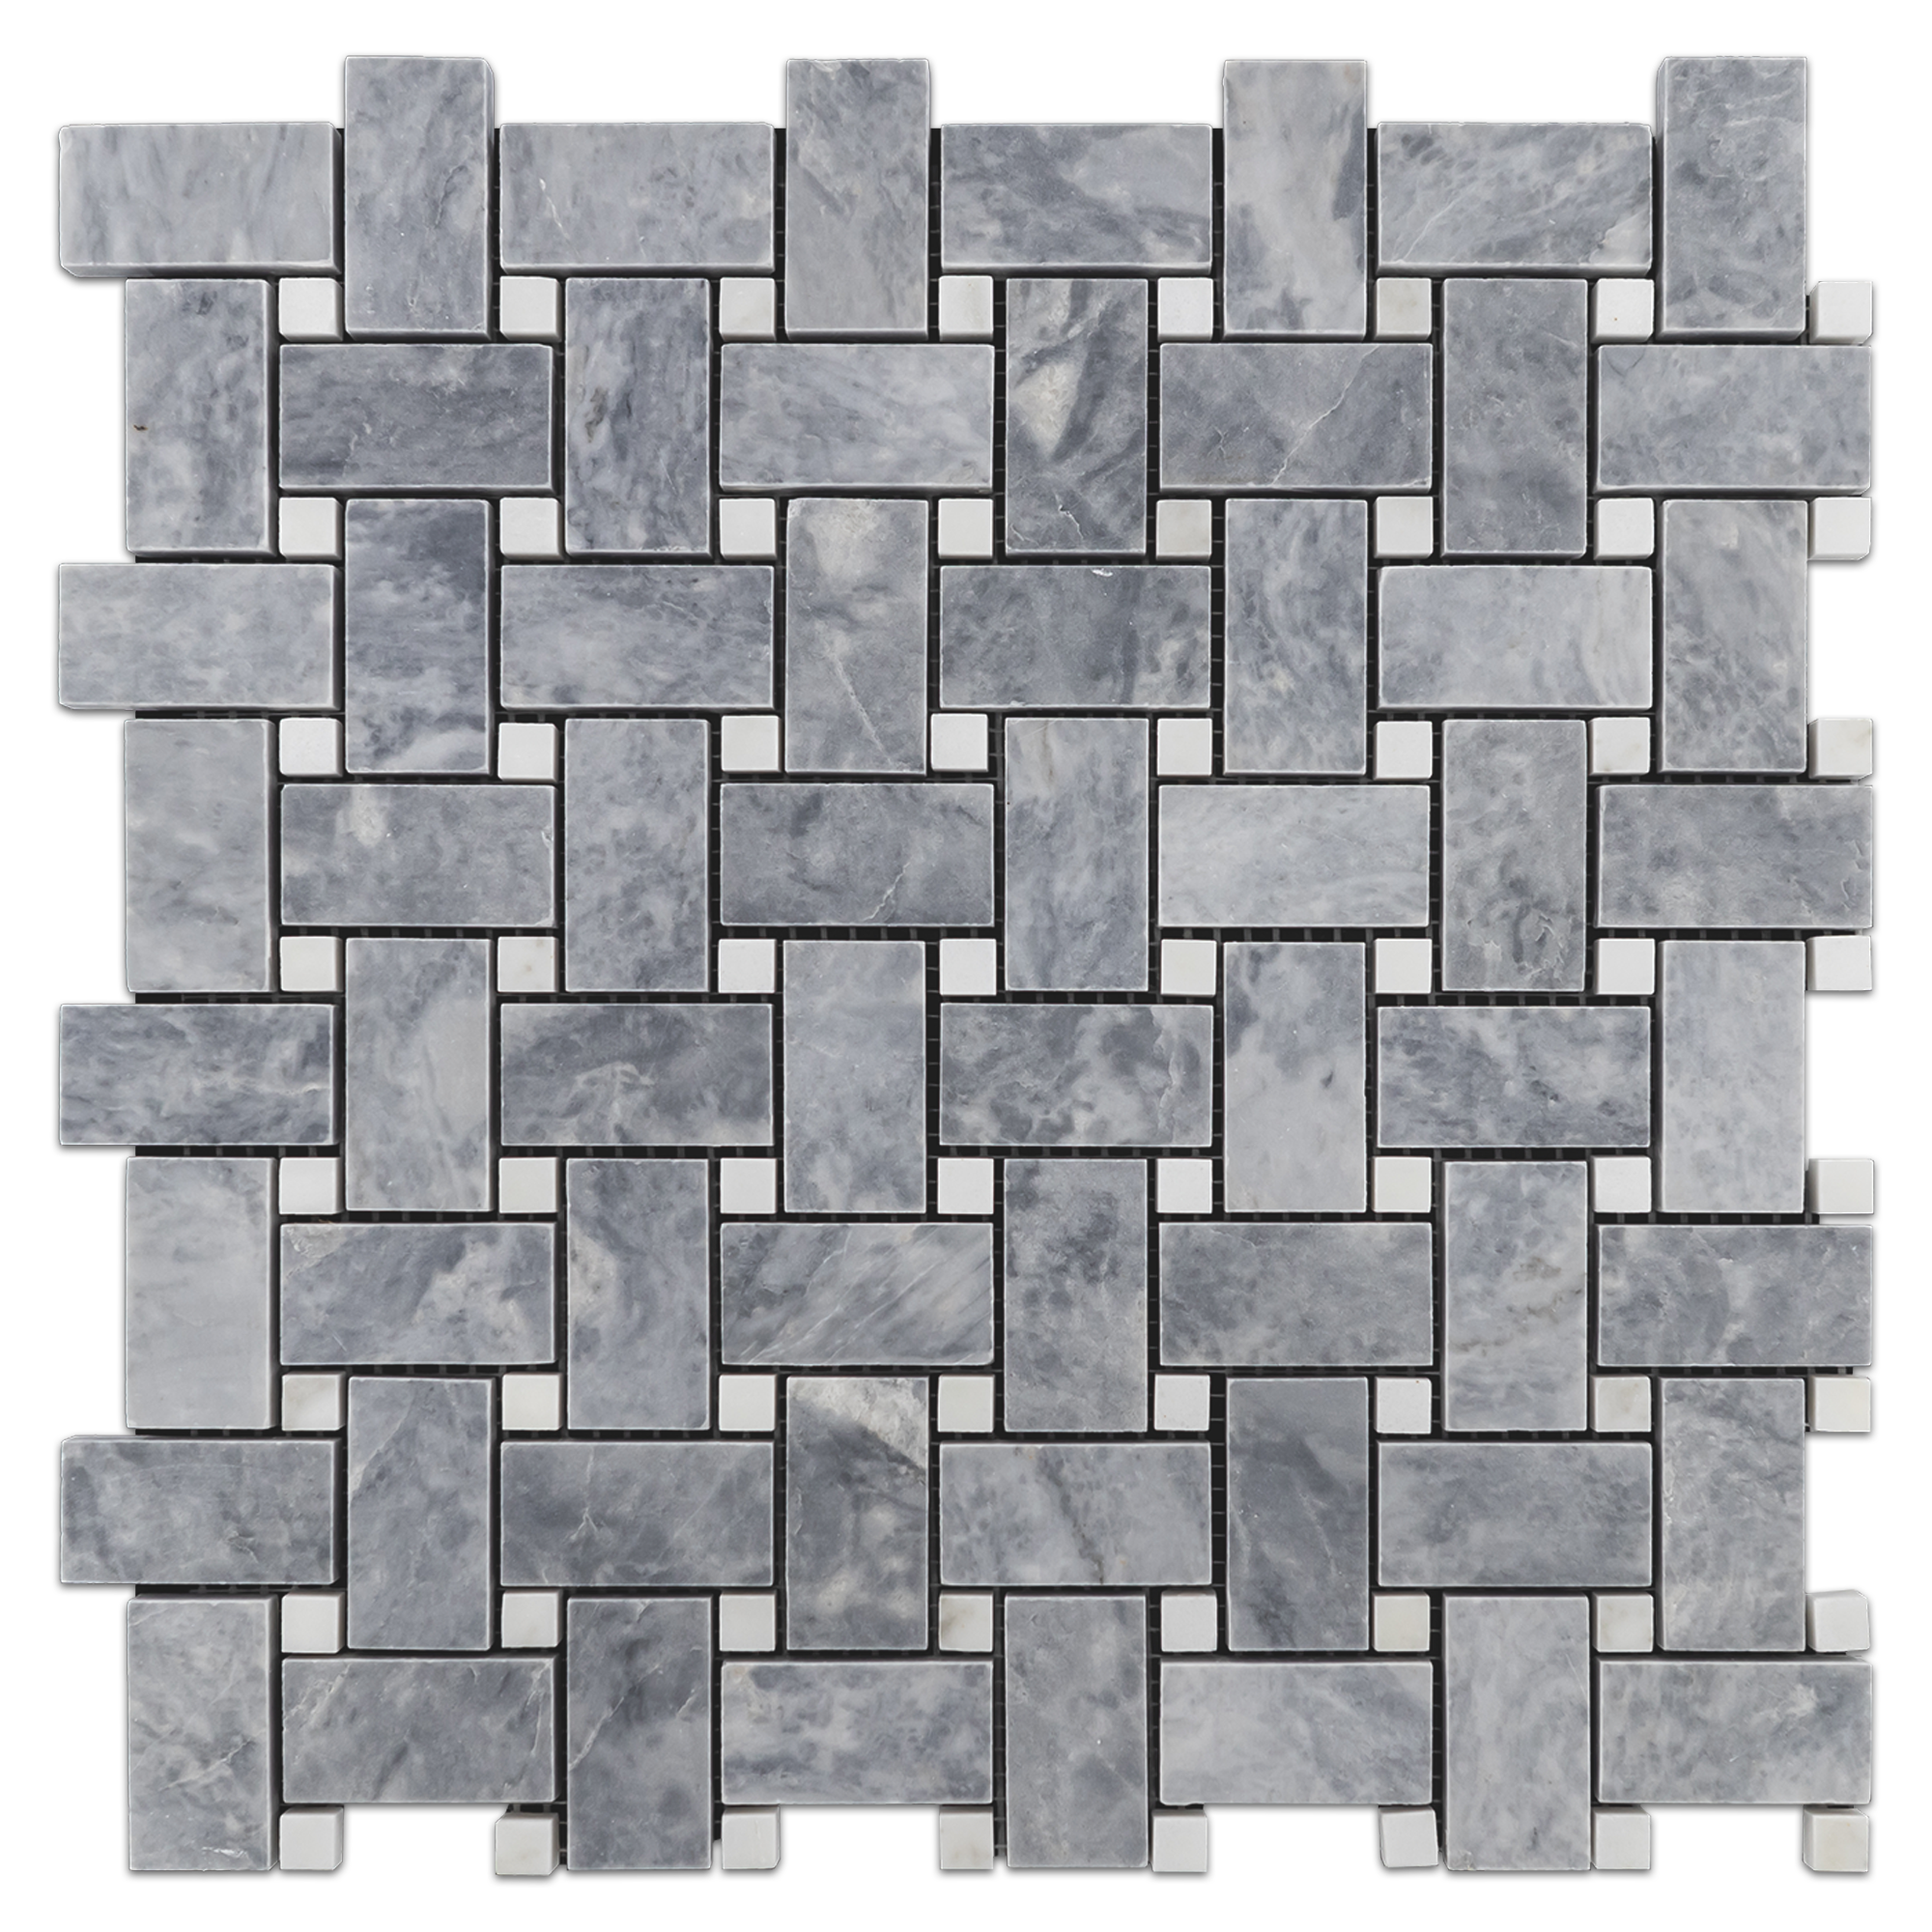 Elon Pacific Gray and Absolute White Marble Stone Blend Basketweave Field Mosaic 12x12x0.375 Honed - Surface Group International Product